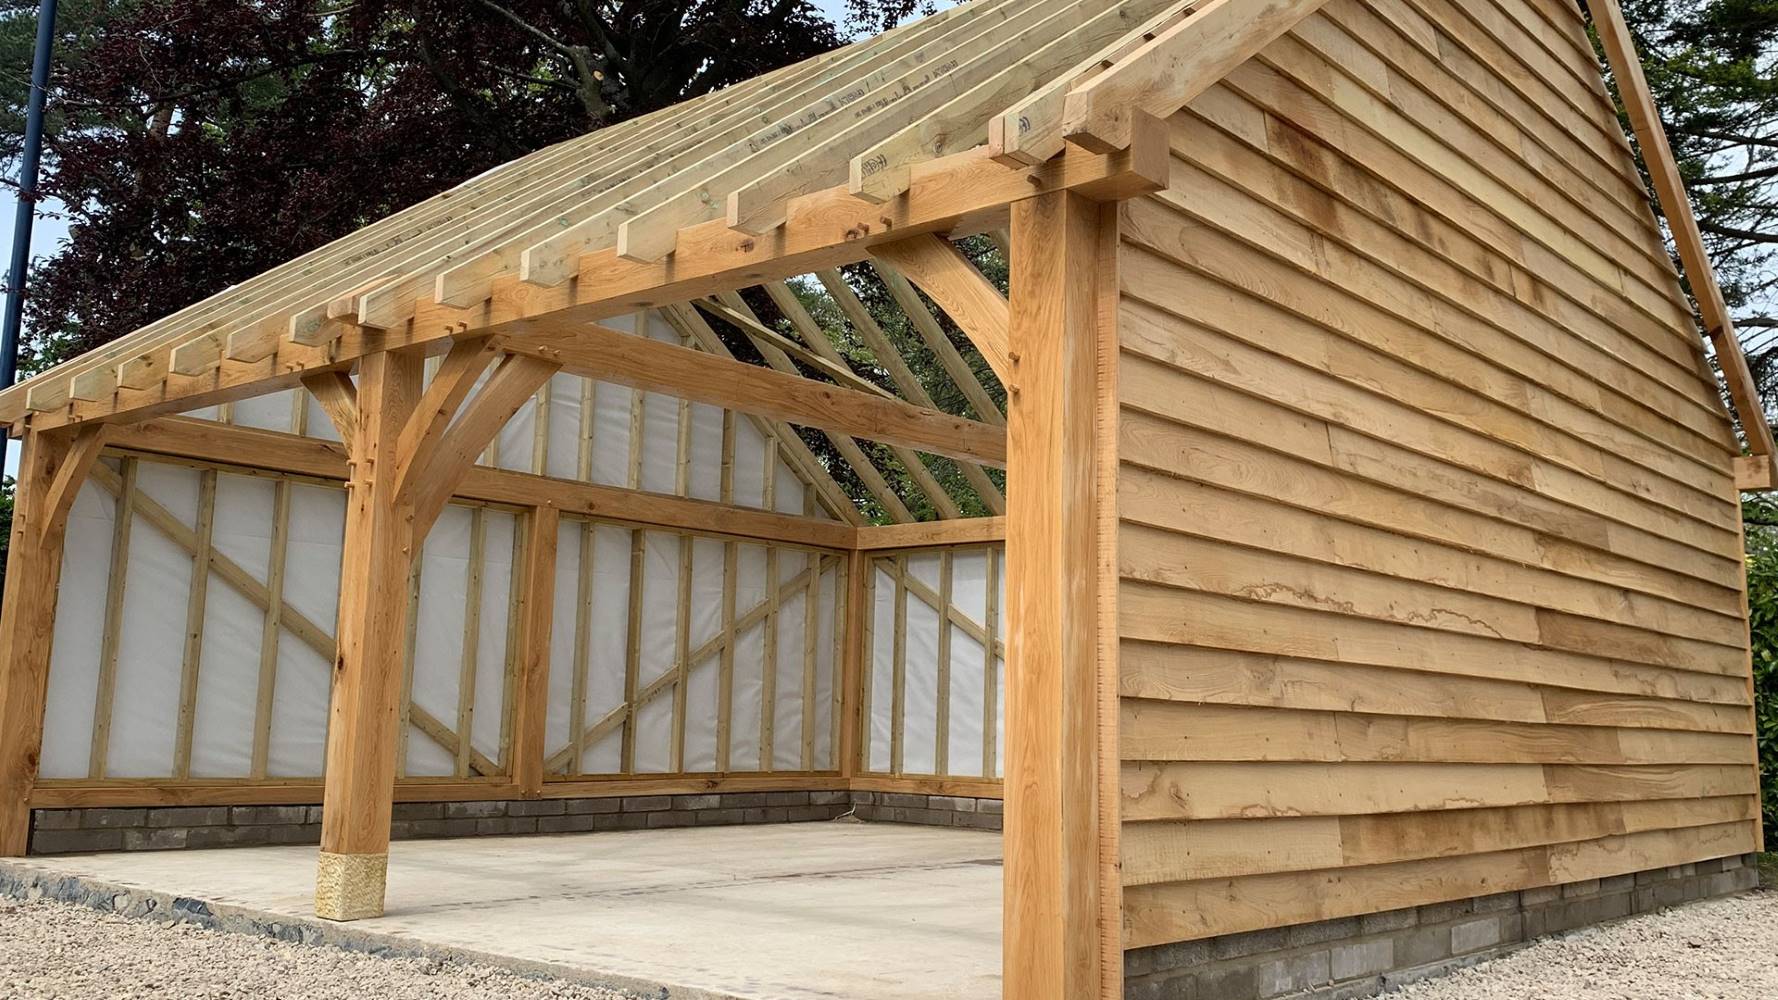 Wood Carport Plan: DIY Guide For Building A Sturdy And Stylish Shelter